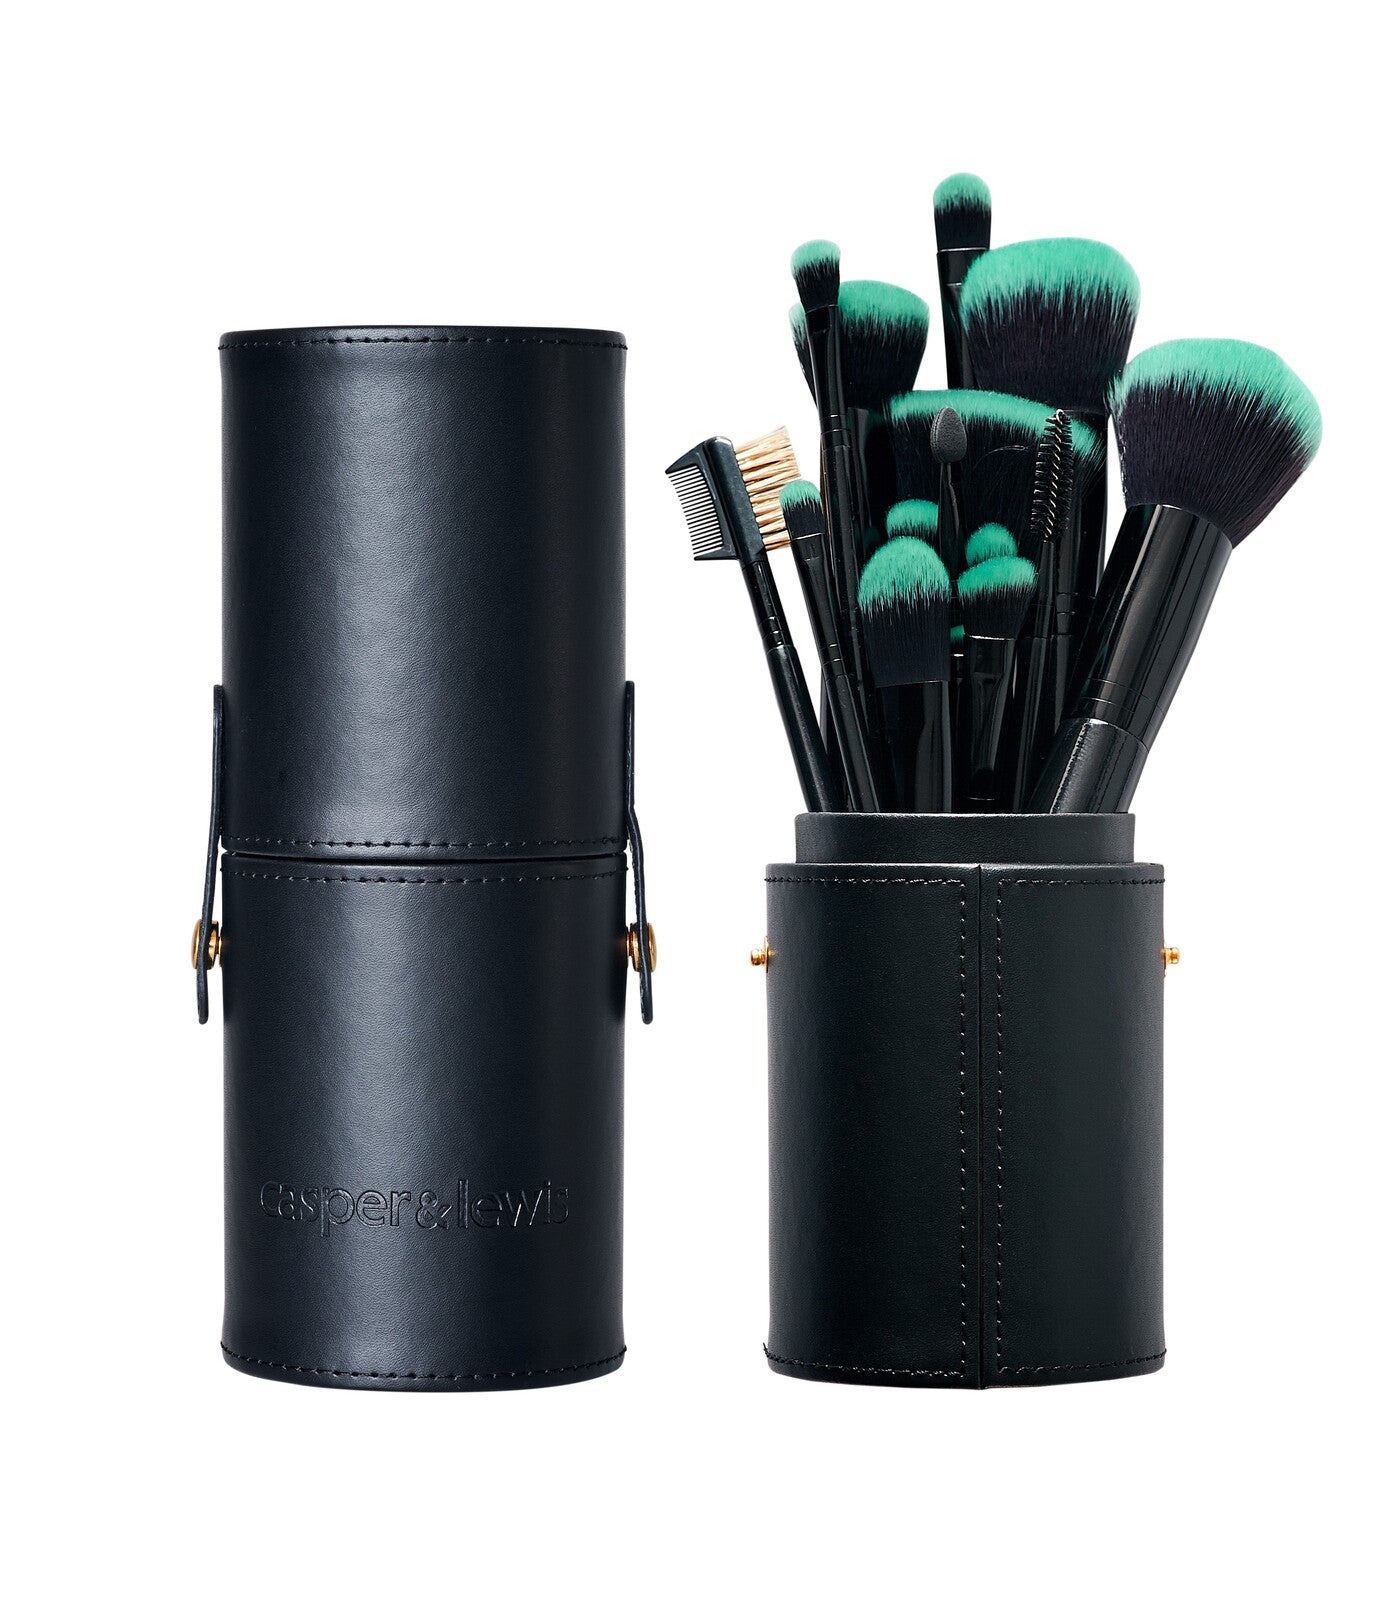 Casper & Lewis 16 Piece Makeup Brush Set Turquoise with Cylinder Case